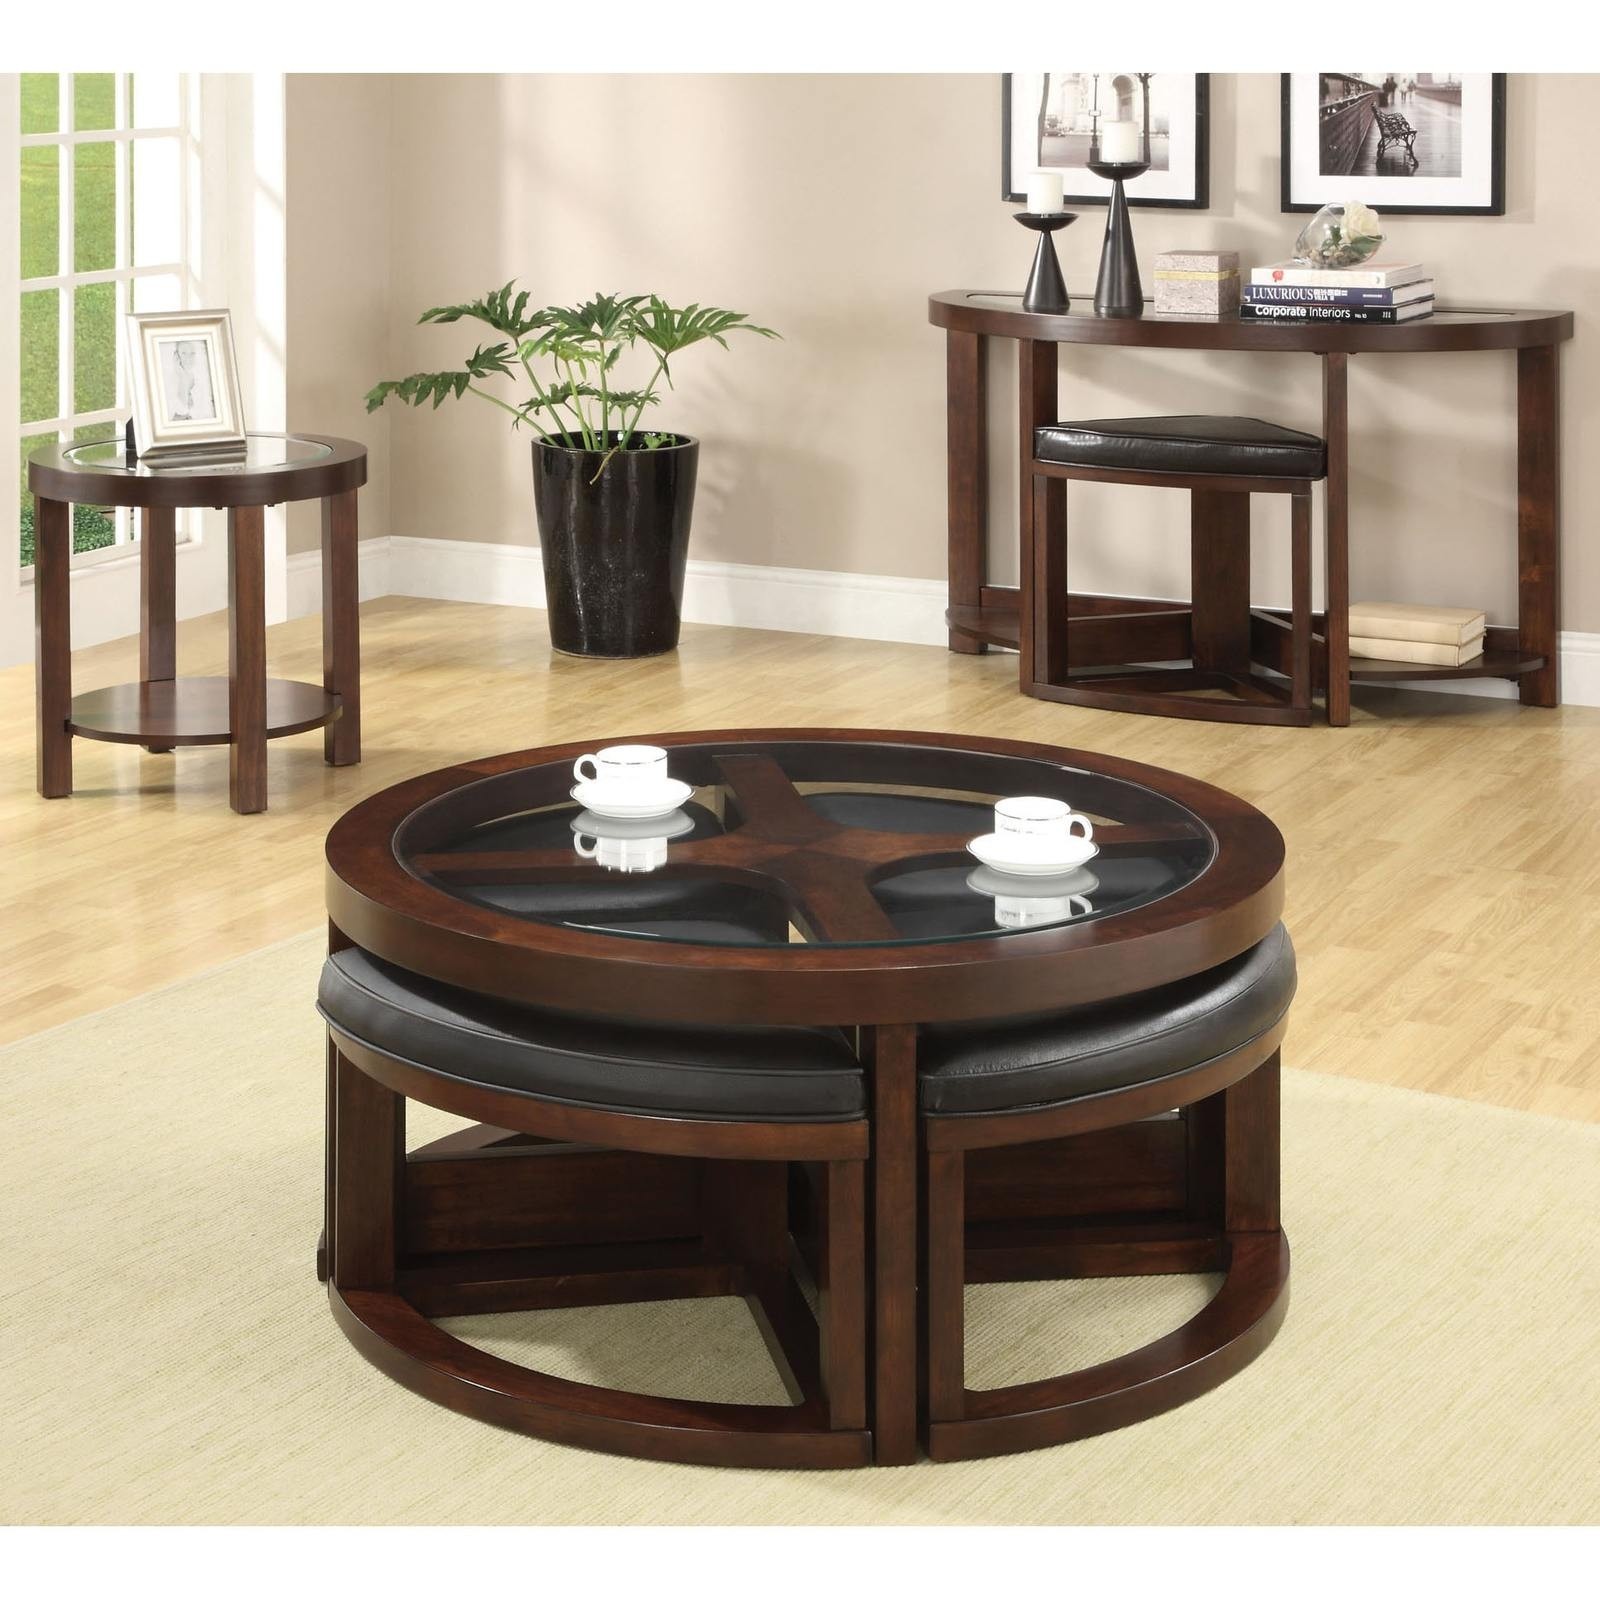 Coffee table ottoman set seating glass chairs wood round